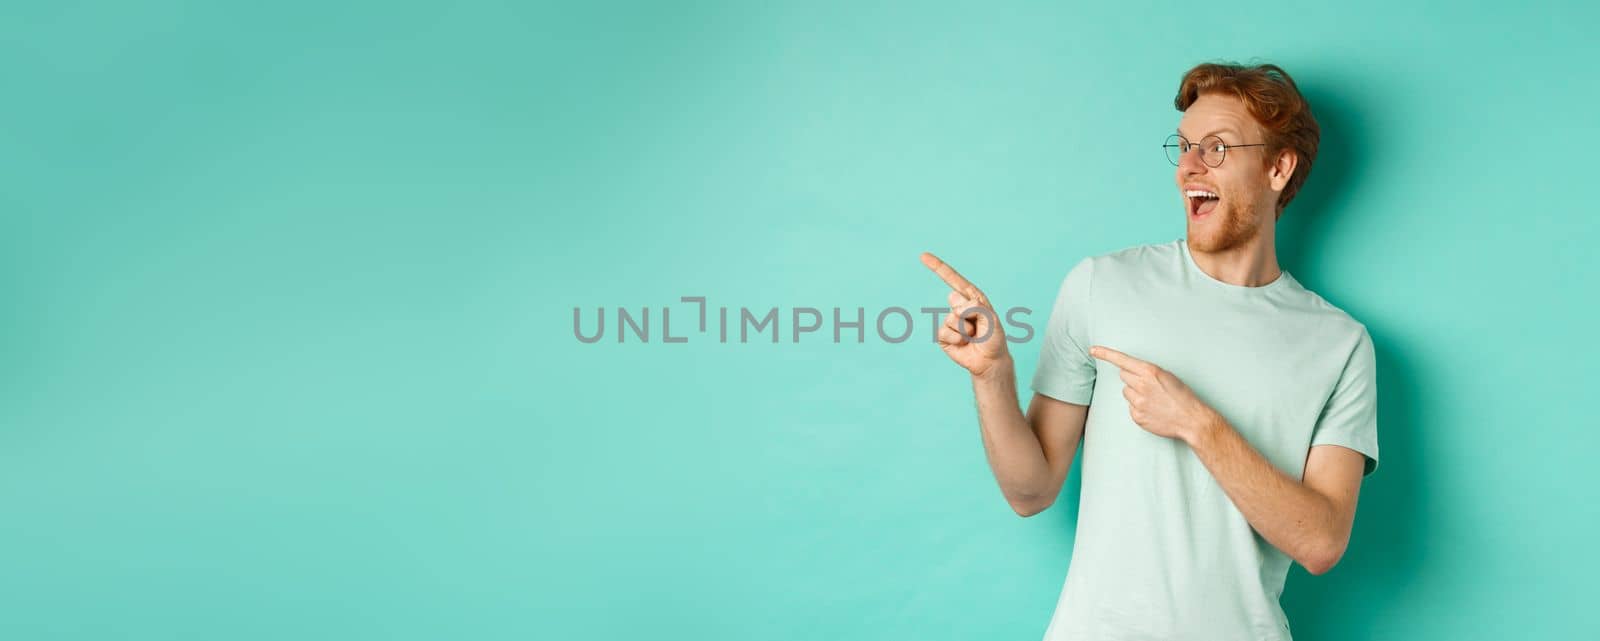 Excited young man with red hair, wearing glasses and t-shirt, pointing and looking left at awesome promotion, smiling happy at banner, turquoise background.